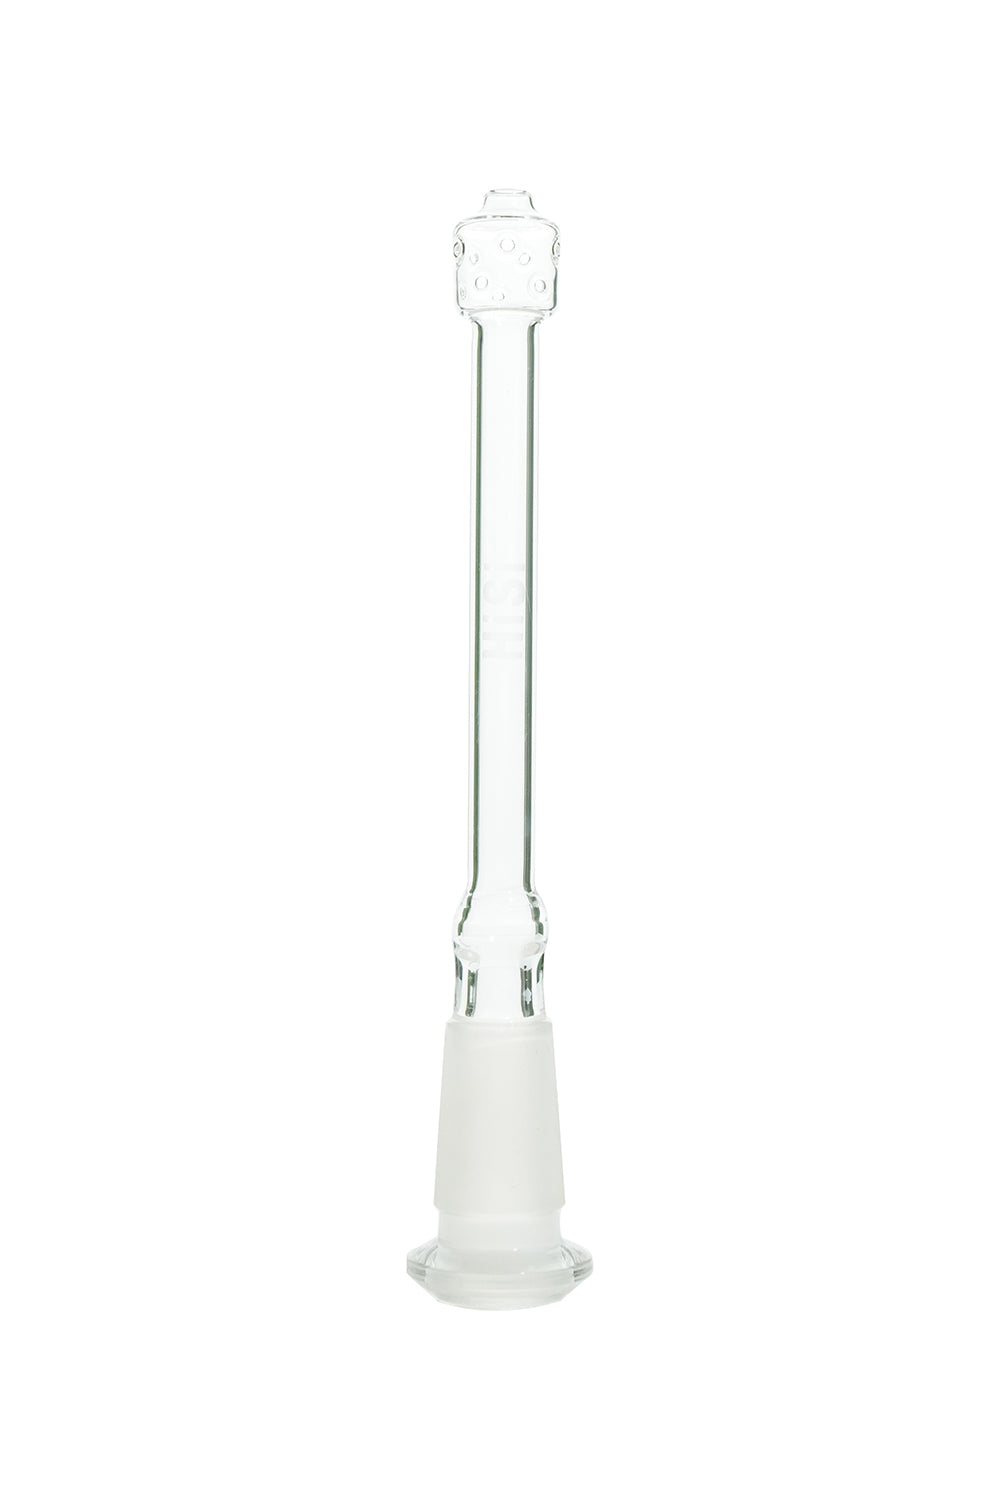 HiSi  Downstem | Stogz | Find Your High